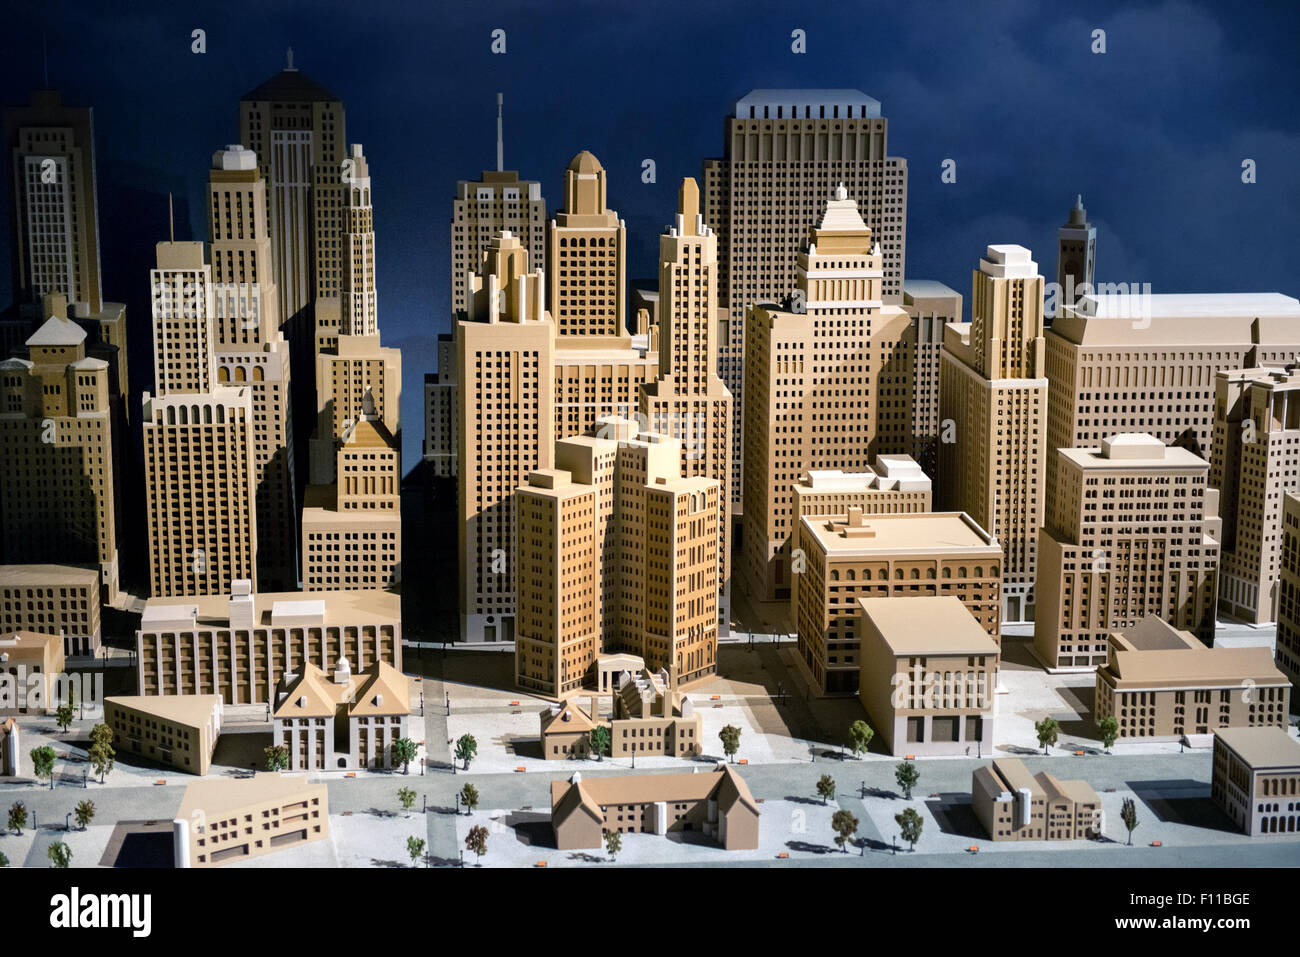 3d scale model of a city showing the CBD with modern skyscrapers and high-rise commercial architecture, infrastructure and build Stock Photo